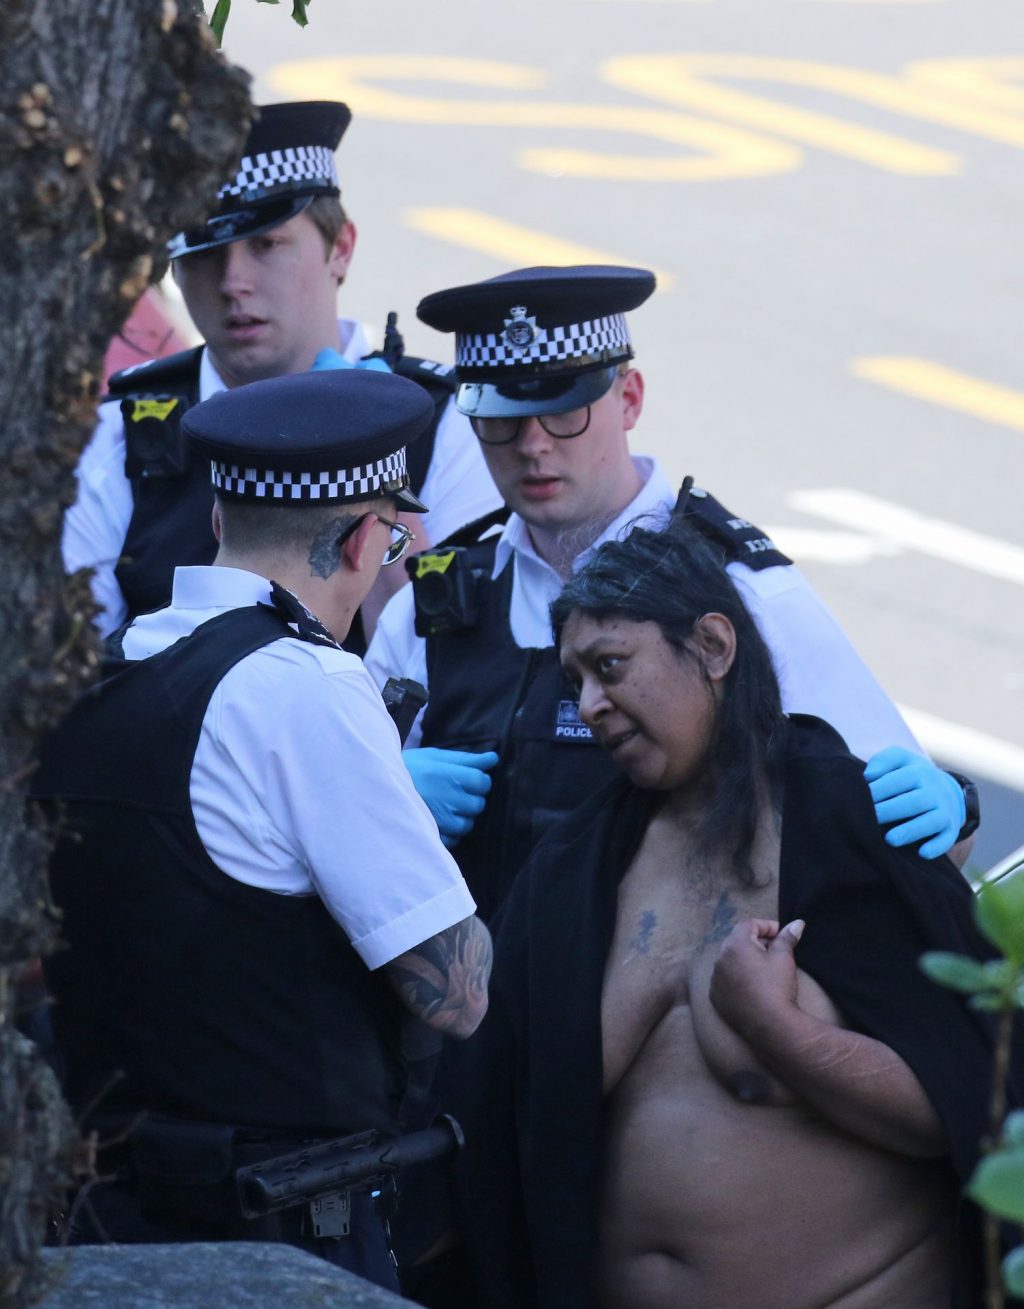 Naked Woman During COVID-19 Pandemic in London (3 Photos)